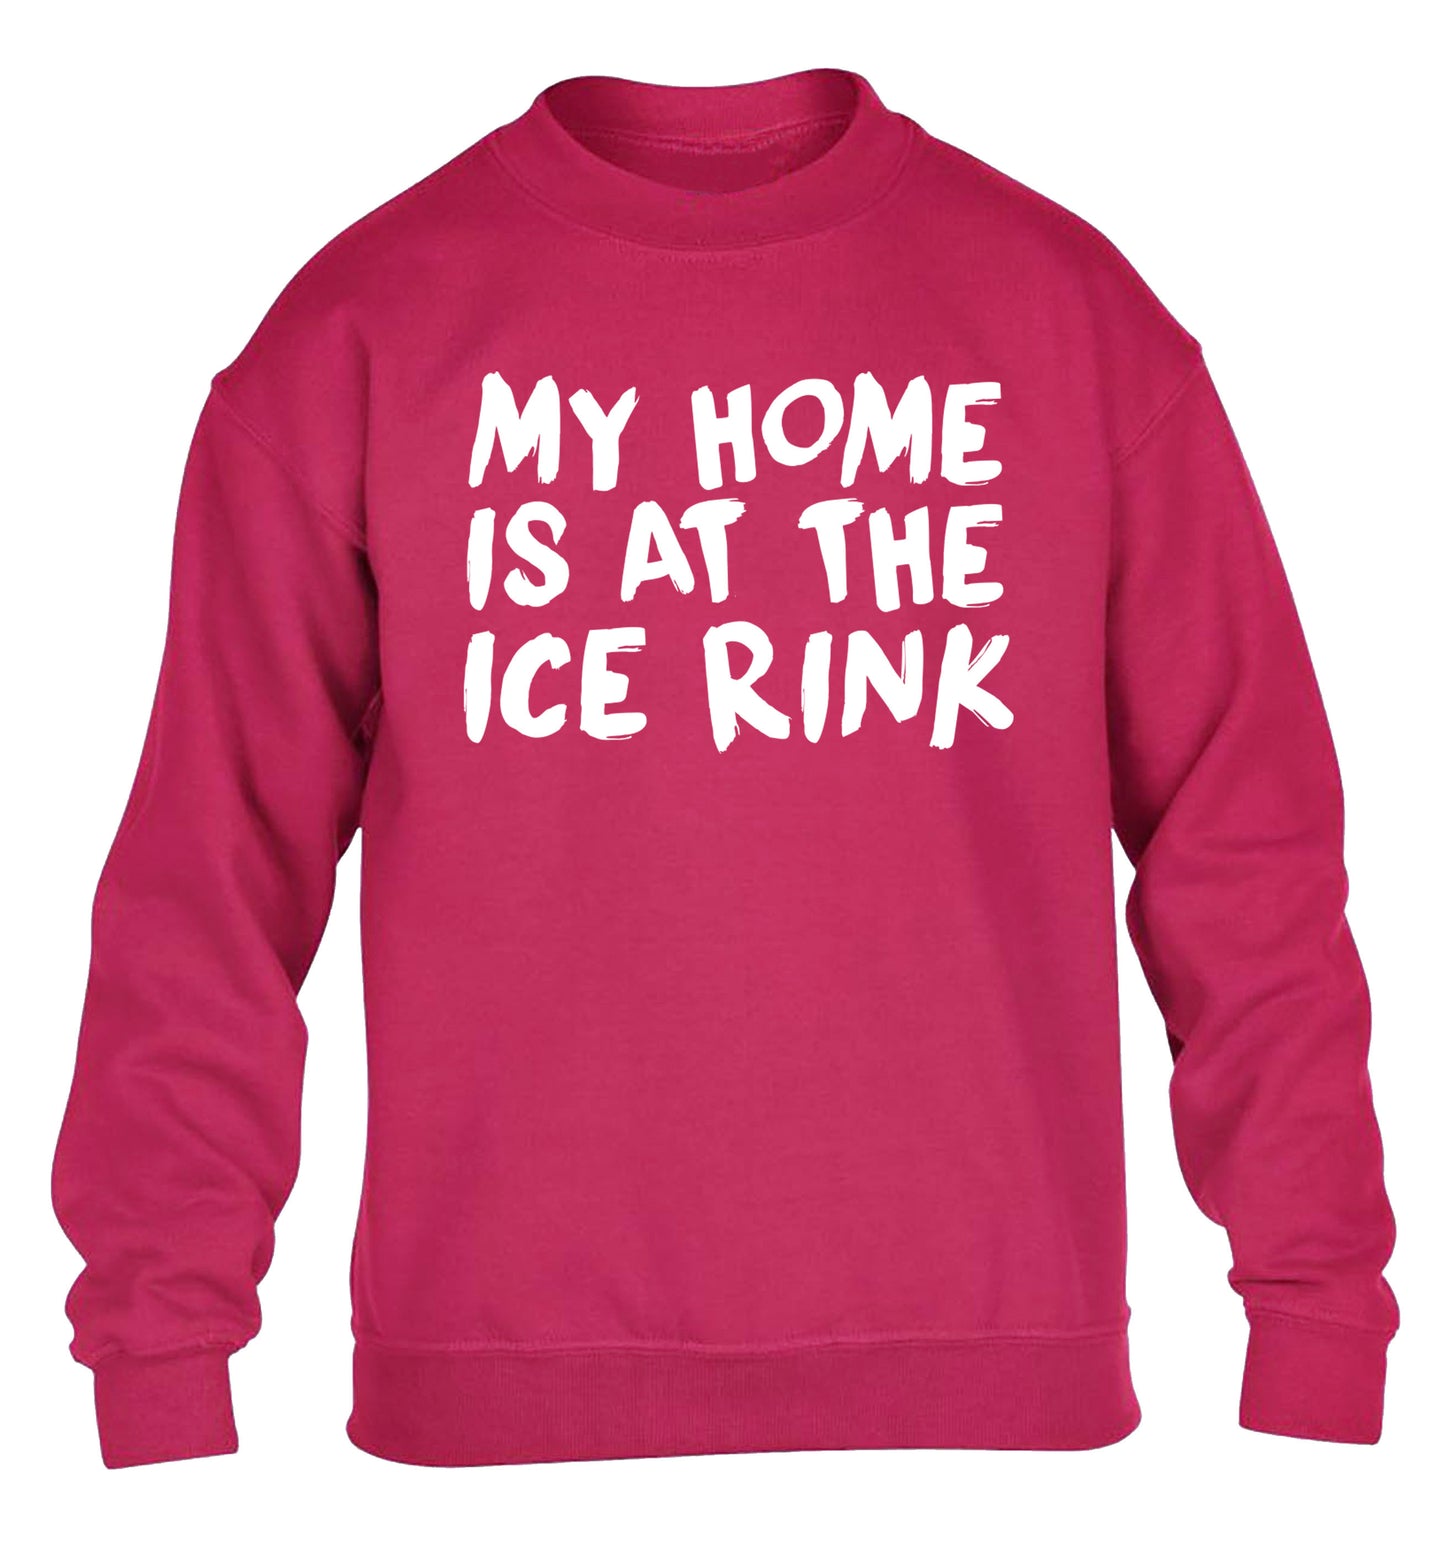 My home is at the ice rink children's pink sweater 12-14 Years